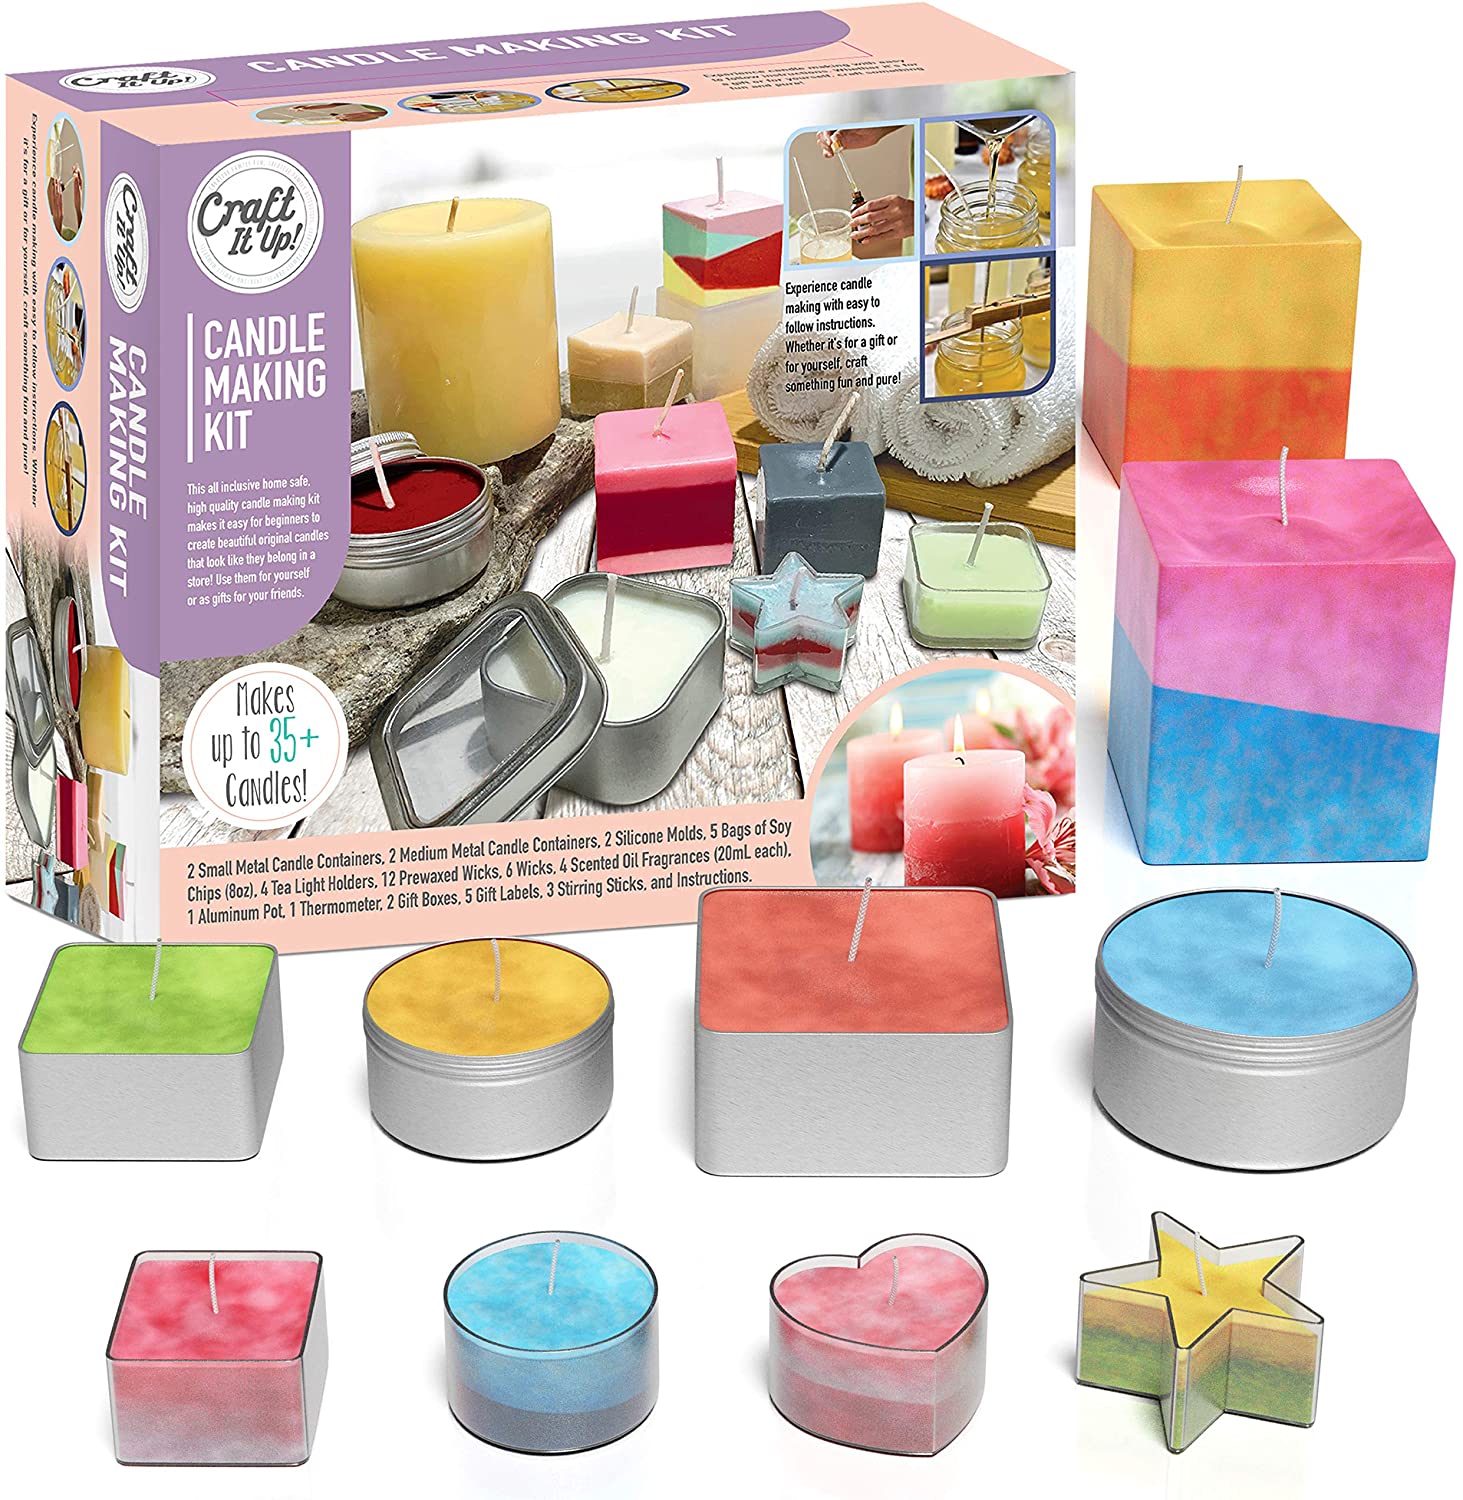 Candle Making Kit by Craft It Up! Complete DIY Beginners Set with Silicone Molds, Soy Candle Wax Supplies Plus Pot, Wicks, Essential Oils & More, Scented Homemade Candles Set for Teens & Adults - image 1 of 7